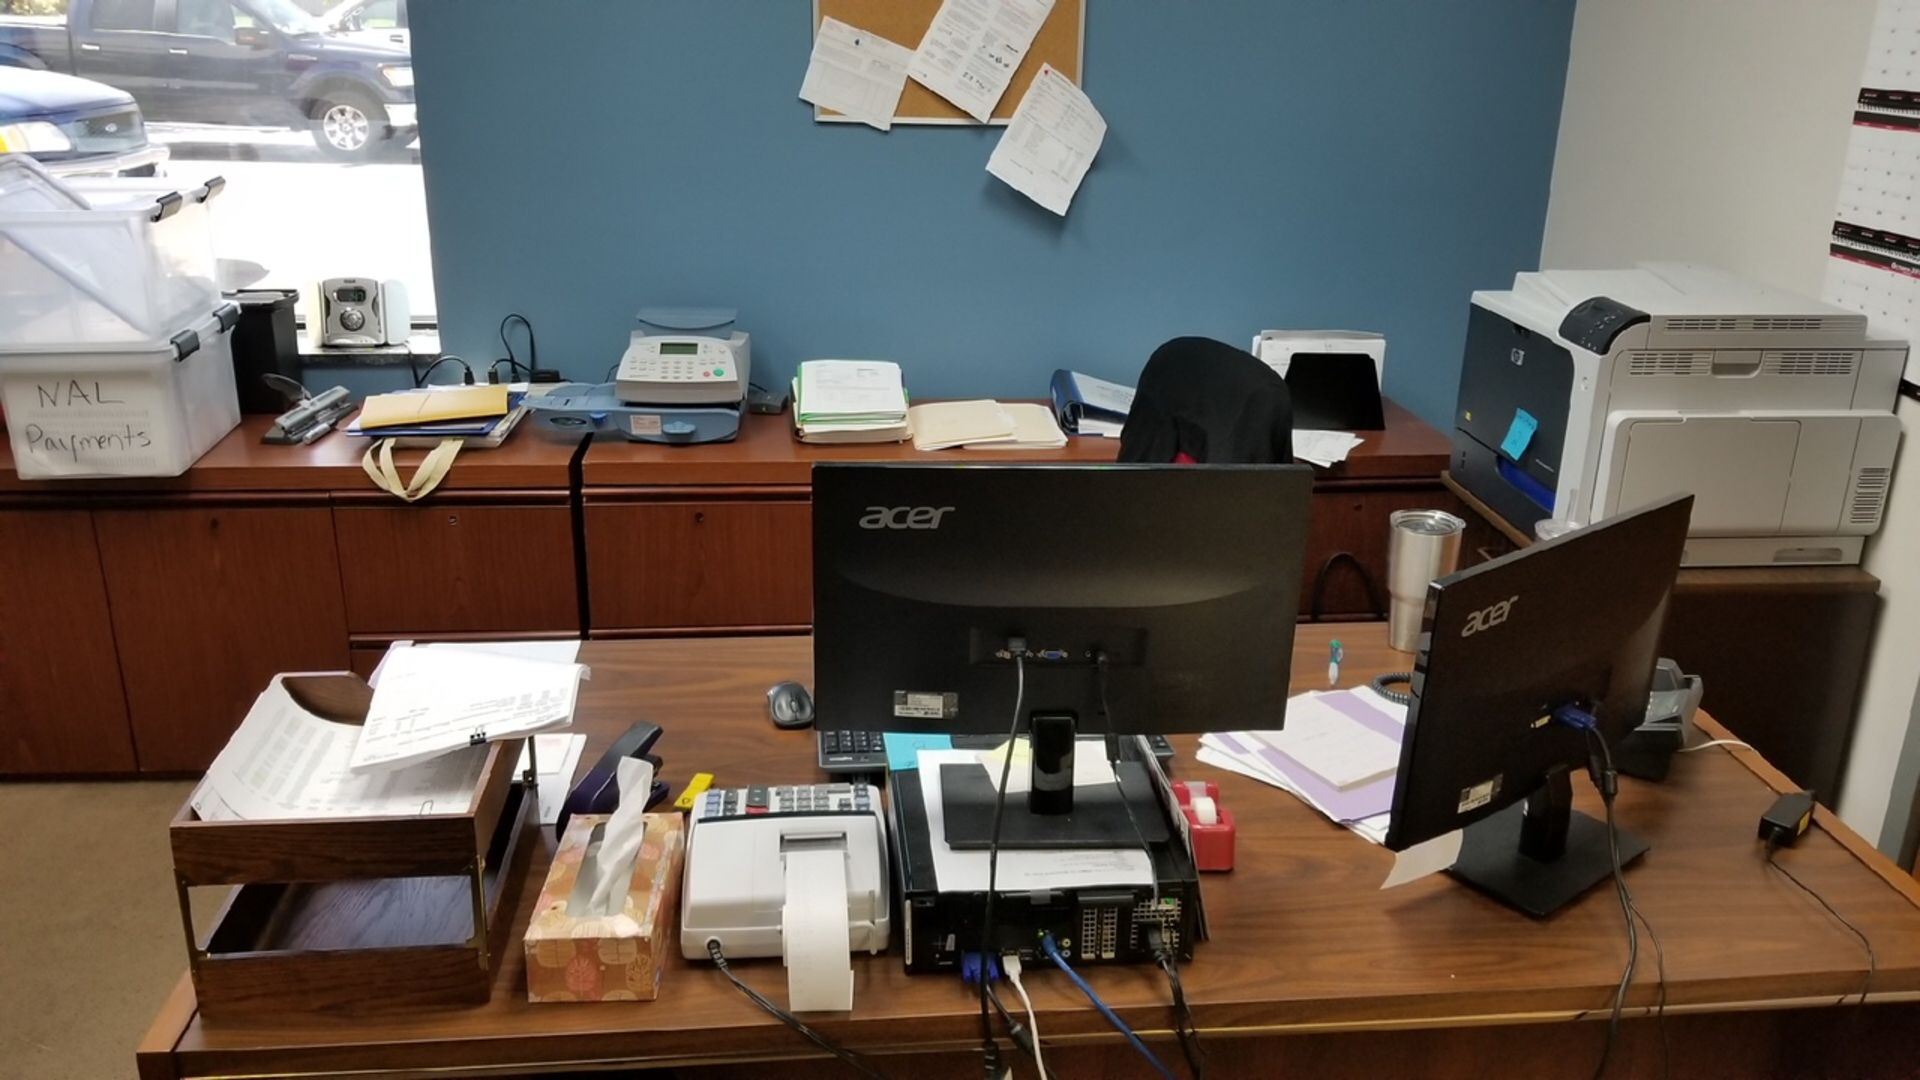 Lot: Desk, Chairs, Lateral File Cabinets (No Computers or Printer) - Image 2 of 3